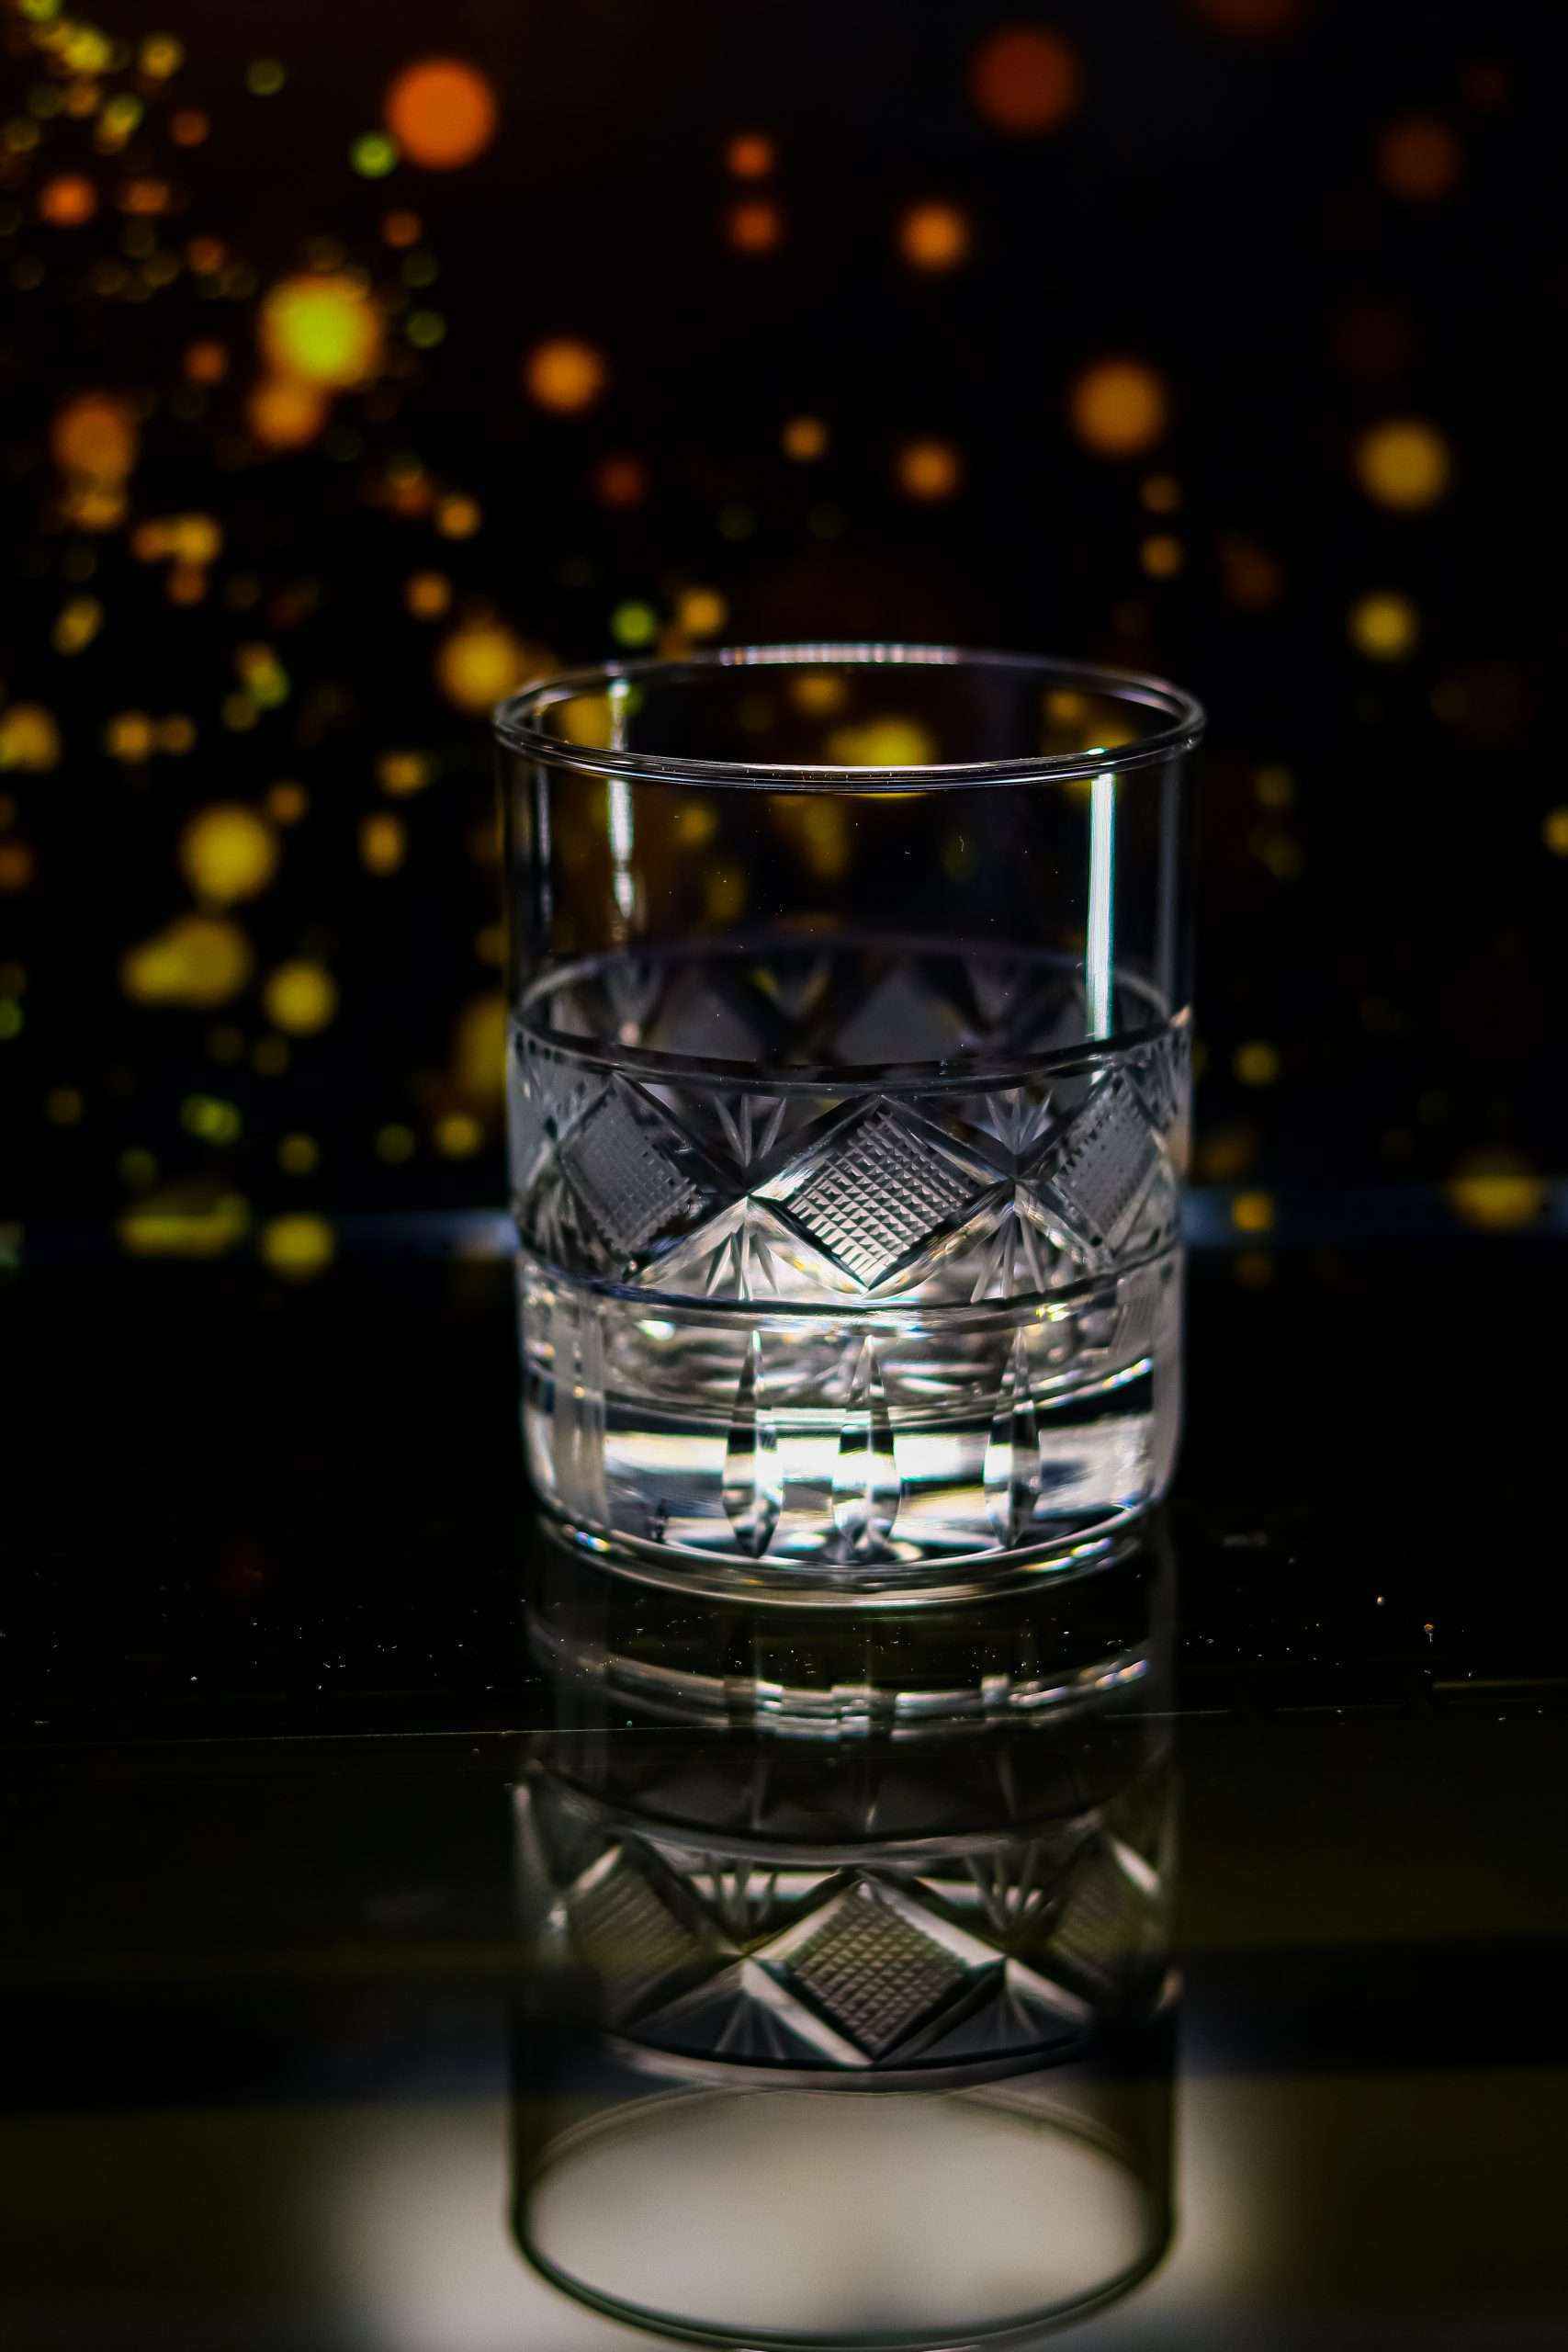 On the Edge Crystal Whiskey Glass